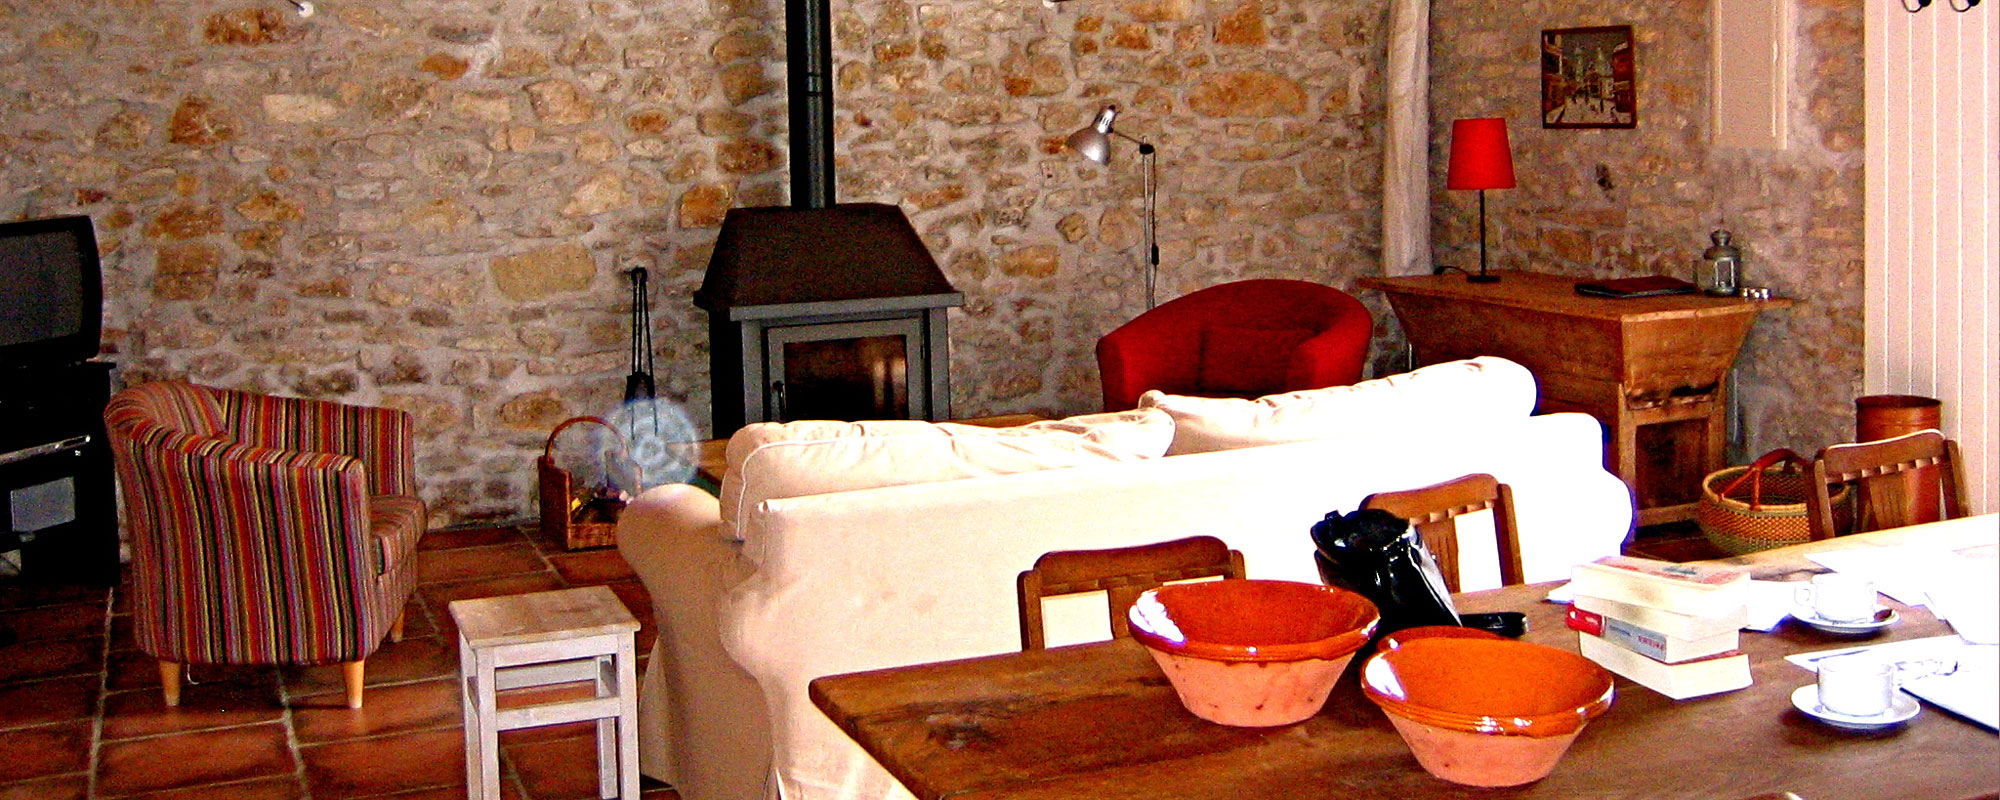 Self catering accommodation is French farmhouse style.